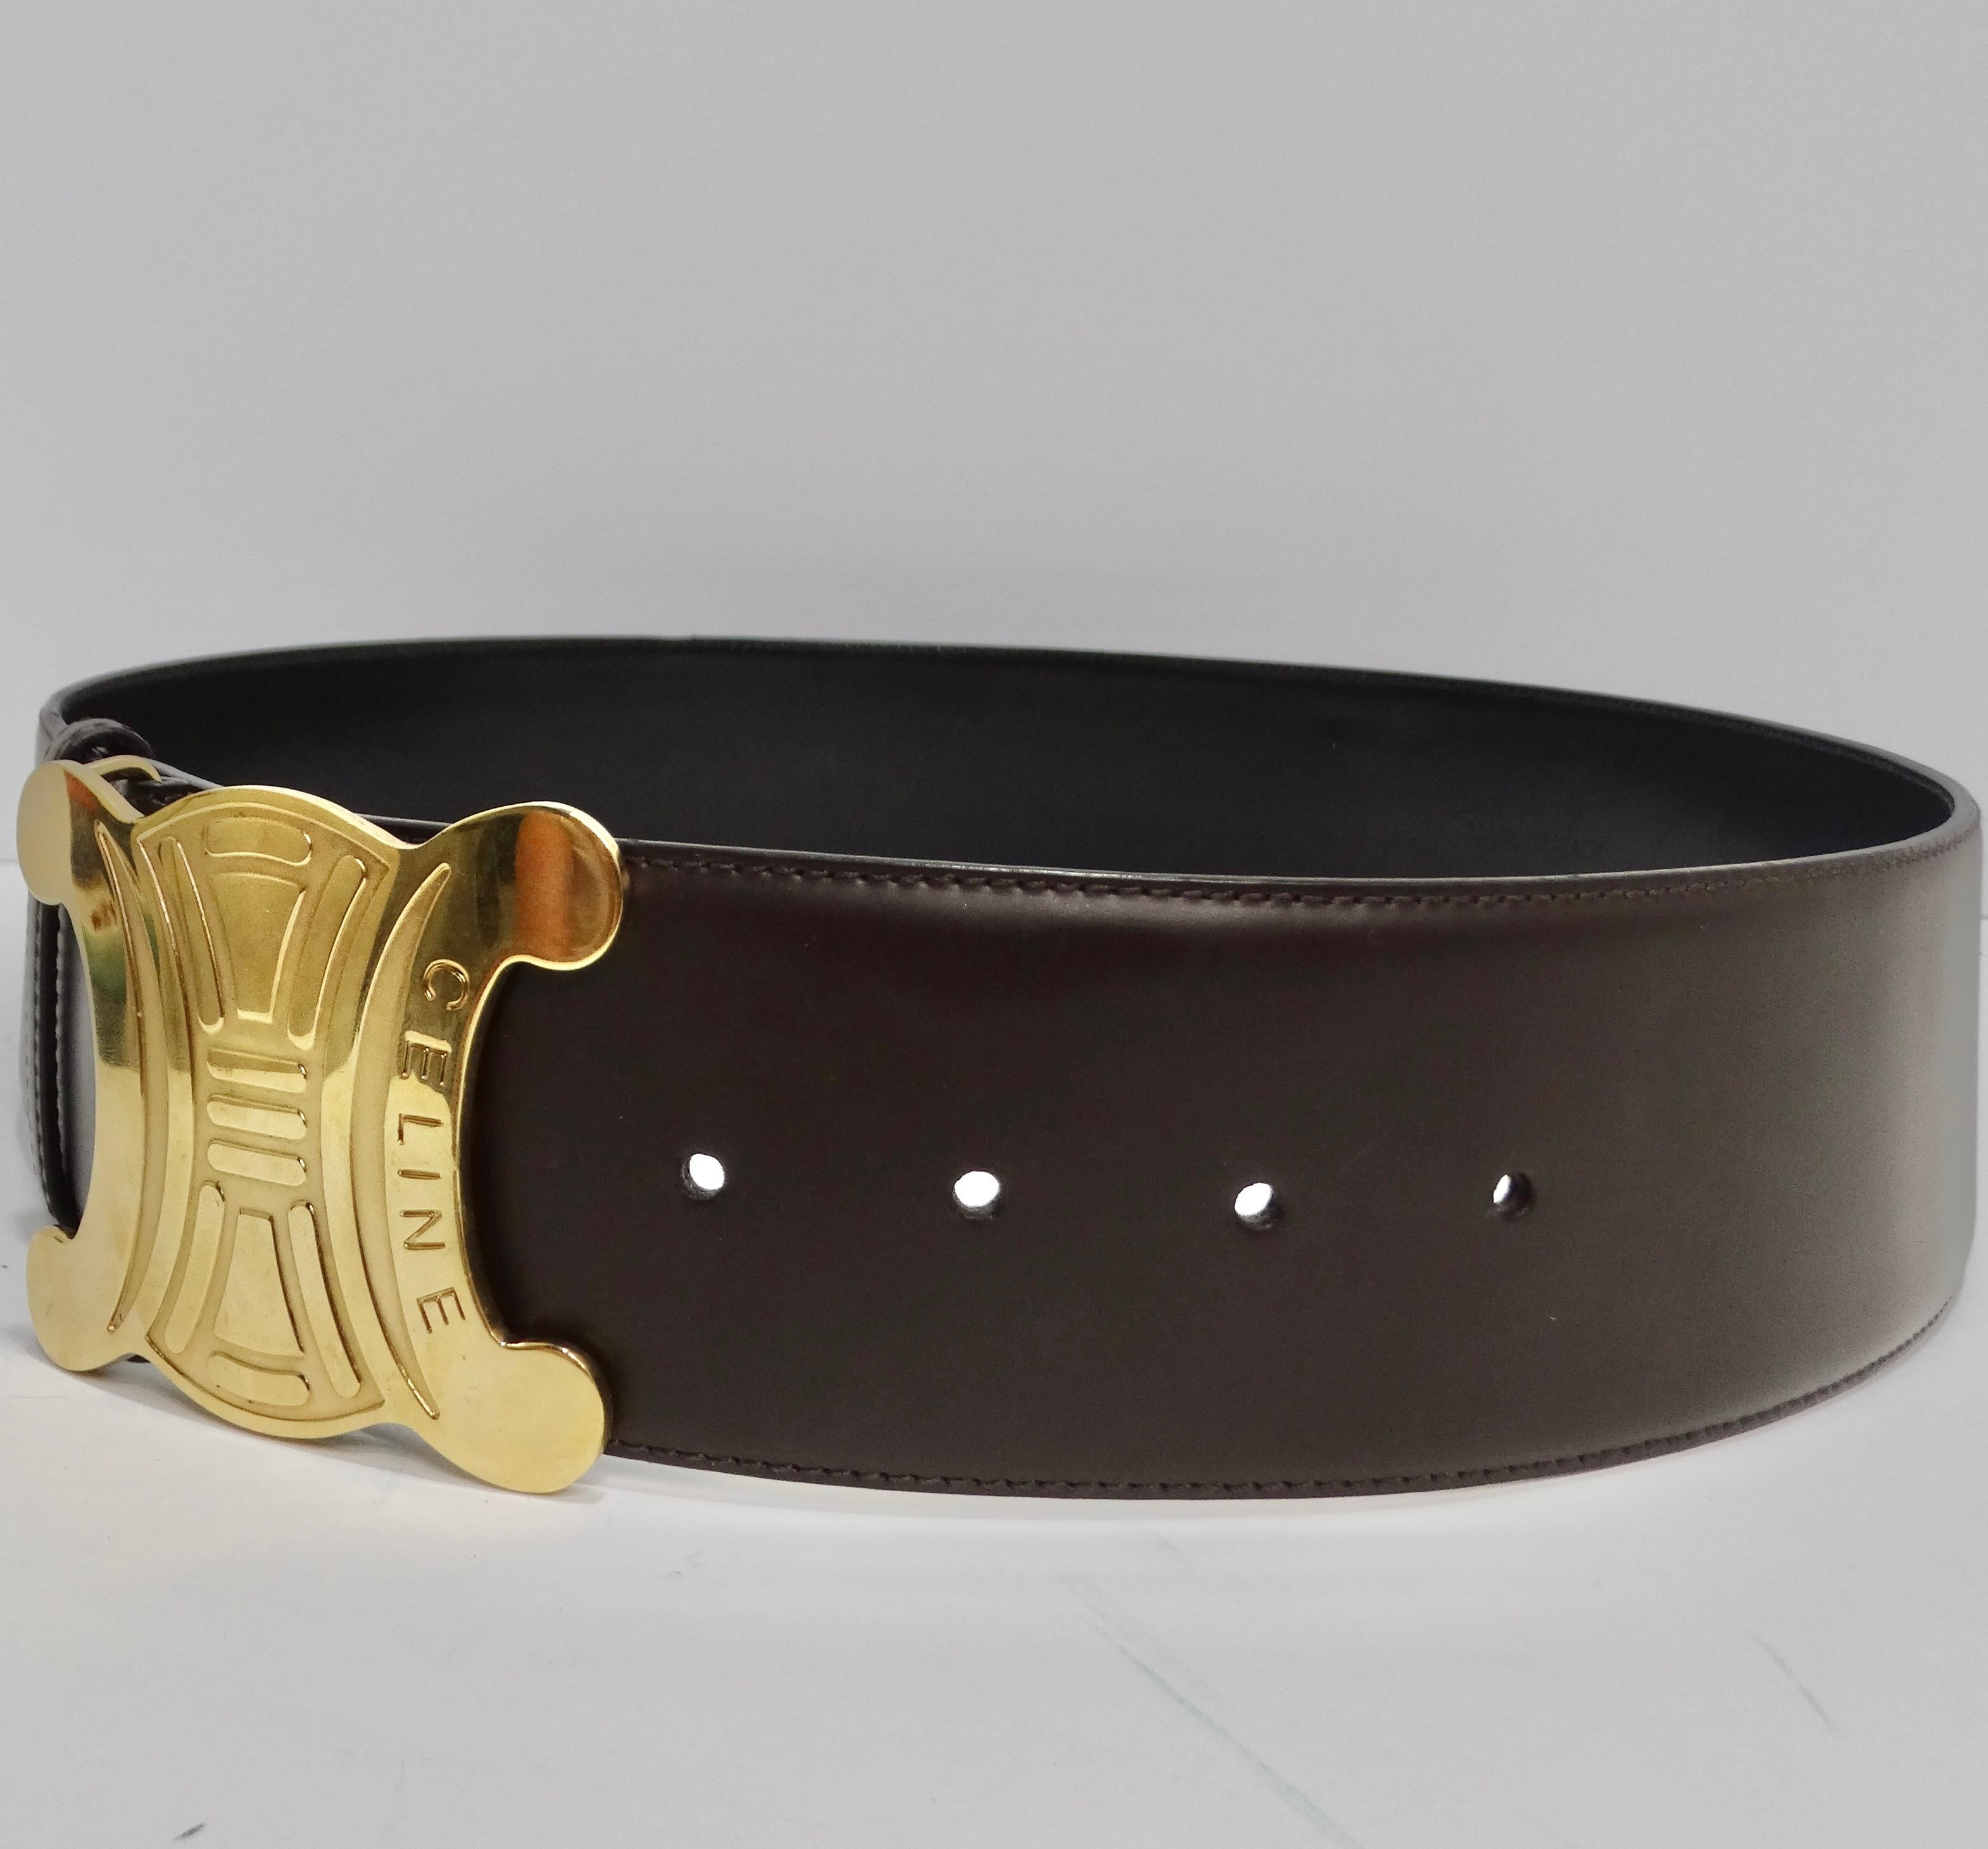 Elevate your wardrobe with this iconic Celine 1990s Brown Leather Gold Tone Belt. Crafted from rich, deep brown leather, this belt exudes timeless sophistication. The true highlight is its striking gold tone buckle, proudly displaying the Celine